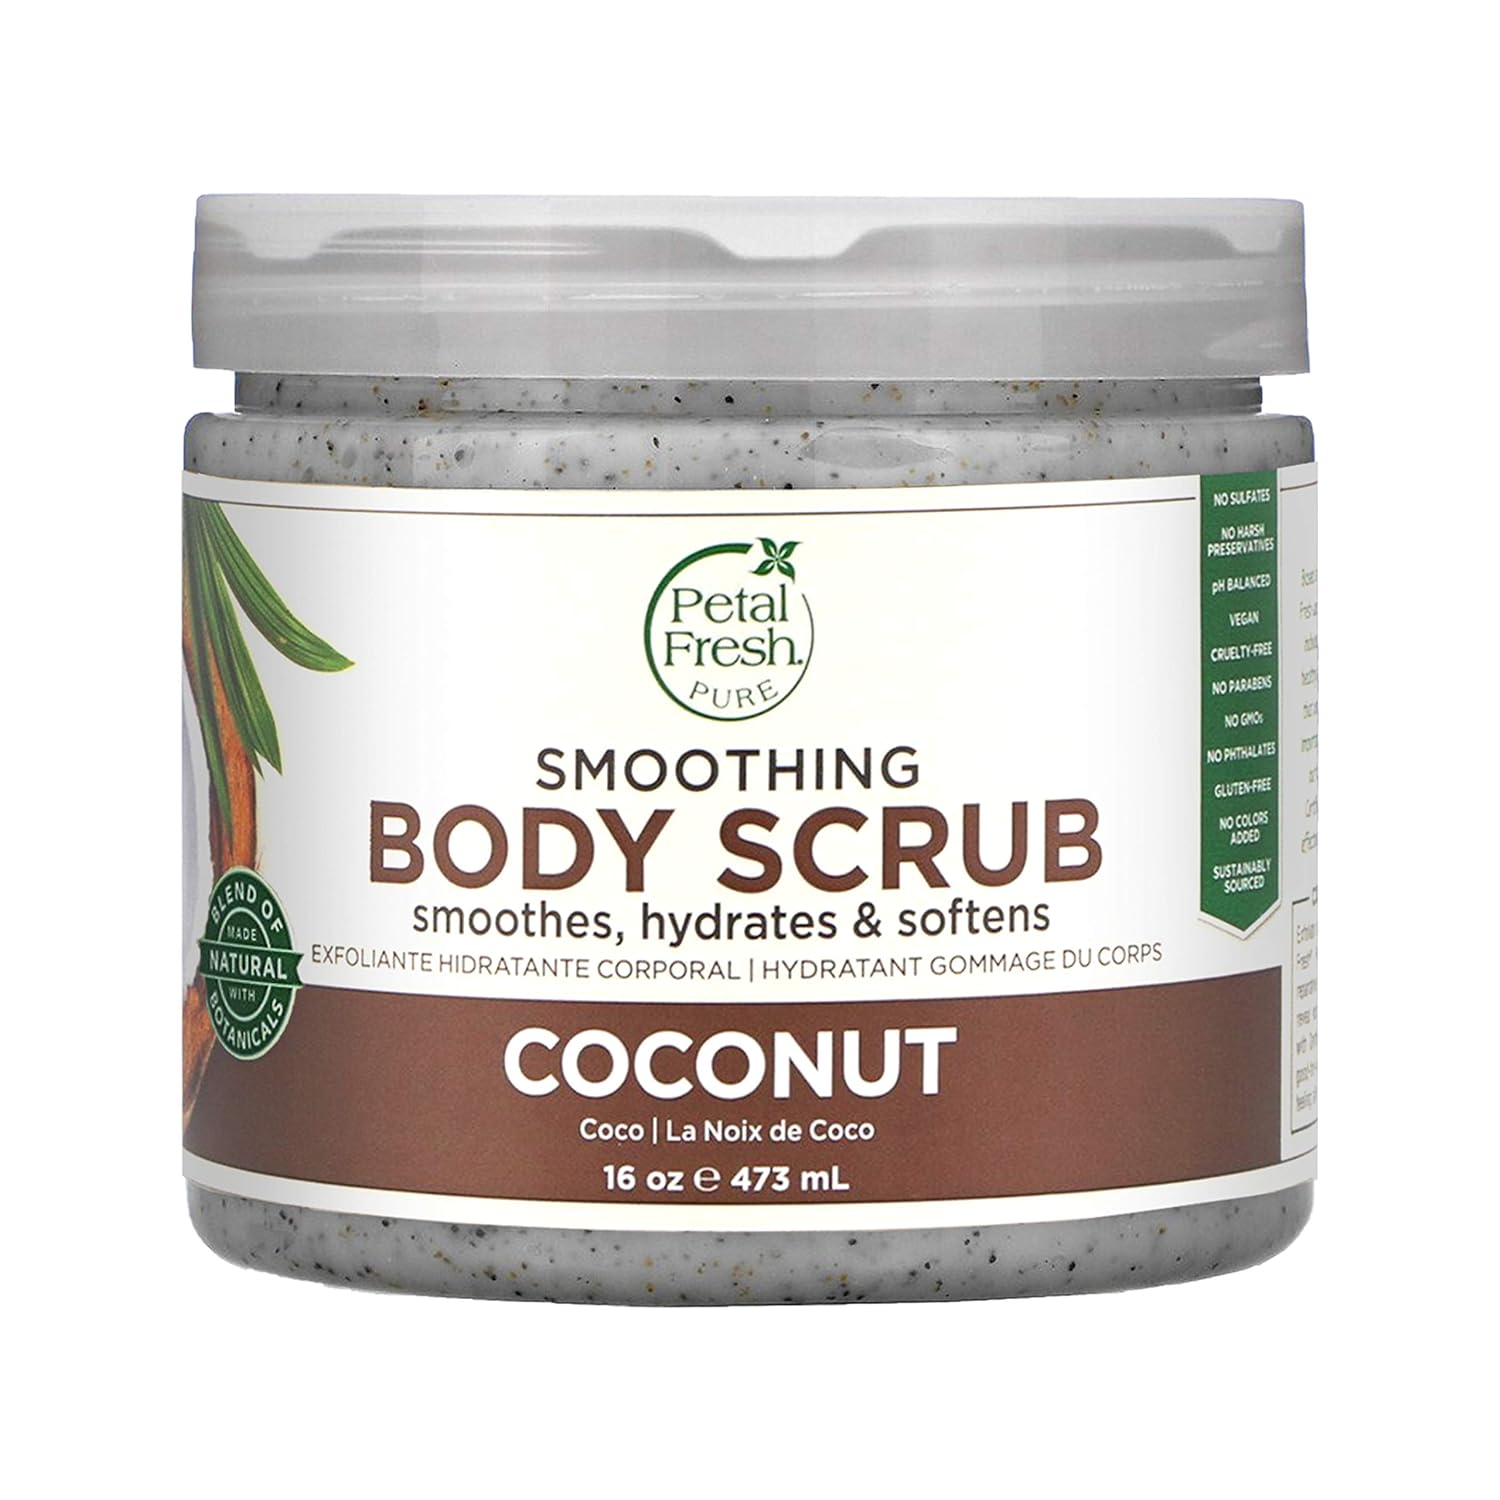 Petal Fresh Coconut Body Scrub, Smoothing Body Pudding, Natural, Gently Exfoliating, Daily Skincare, Vegan and Cruelty Free, 16 oz